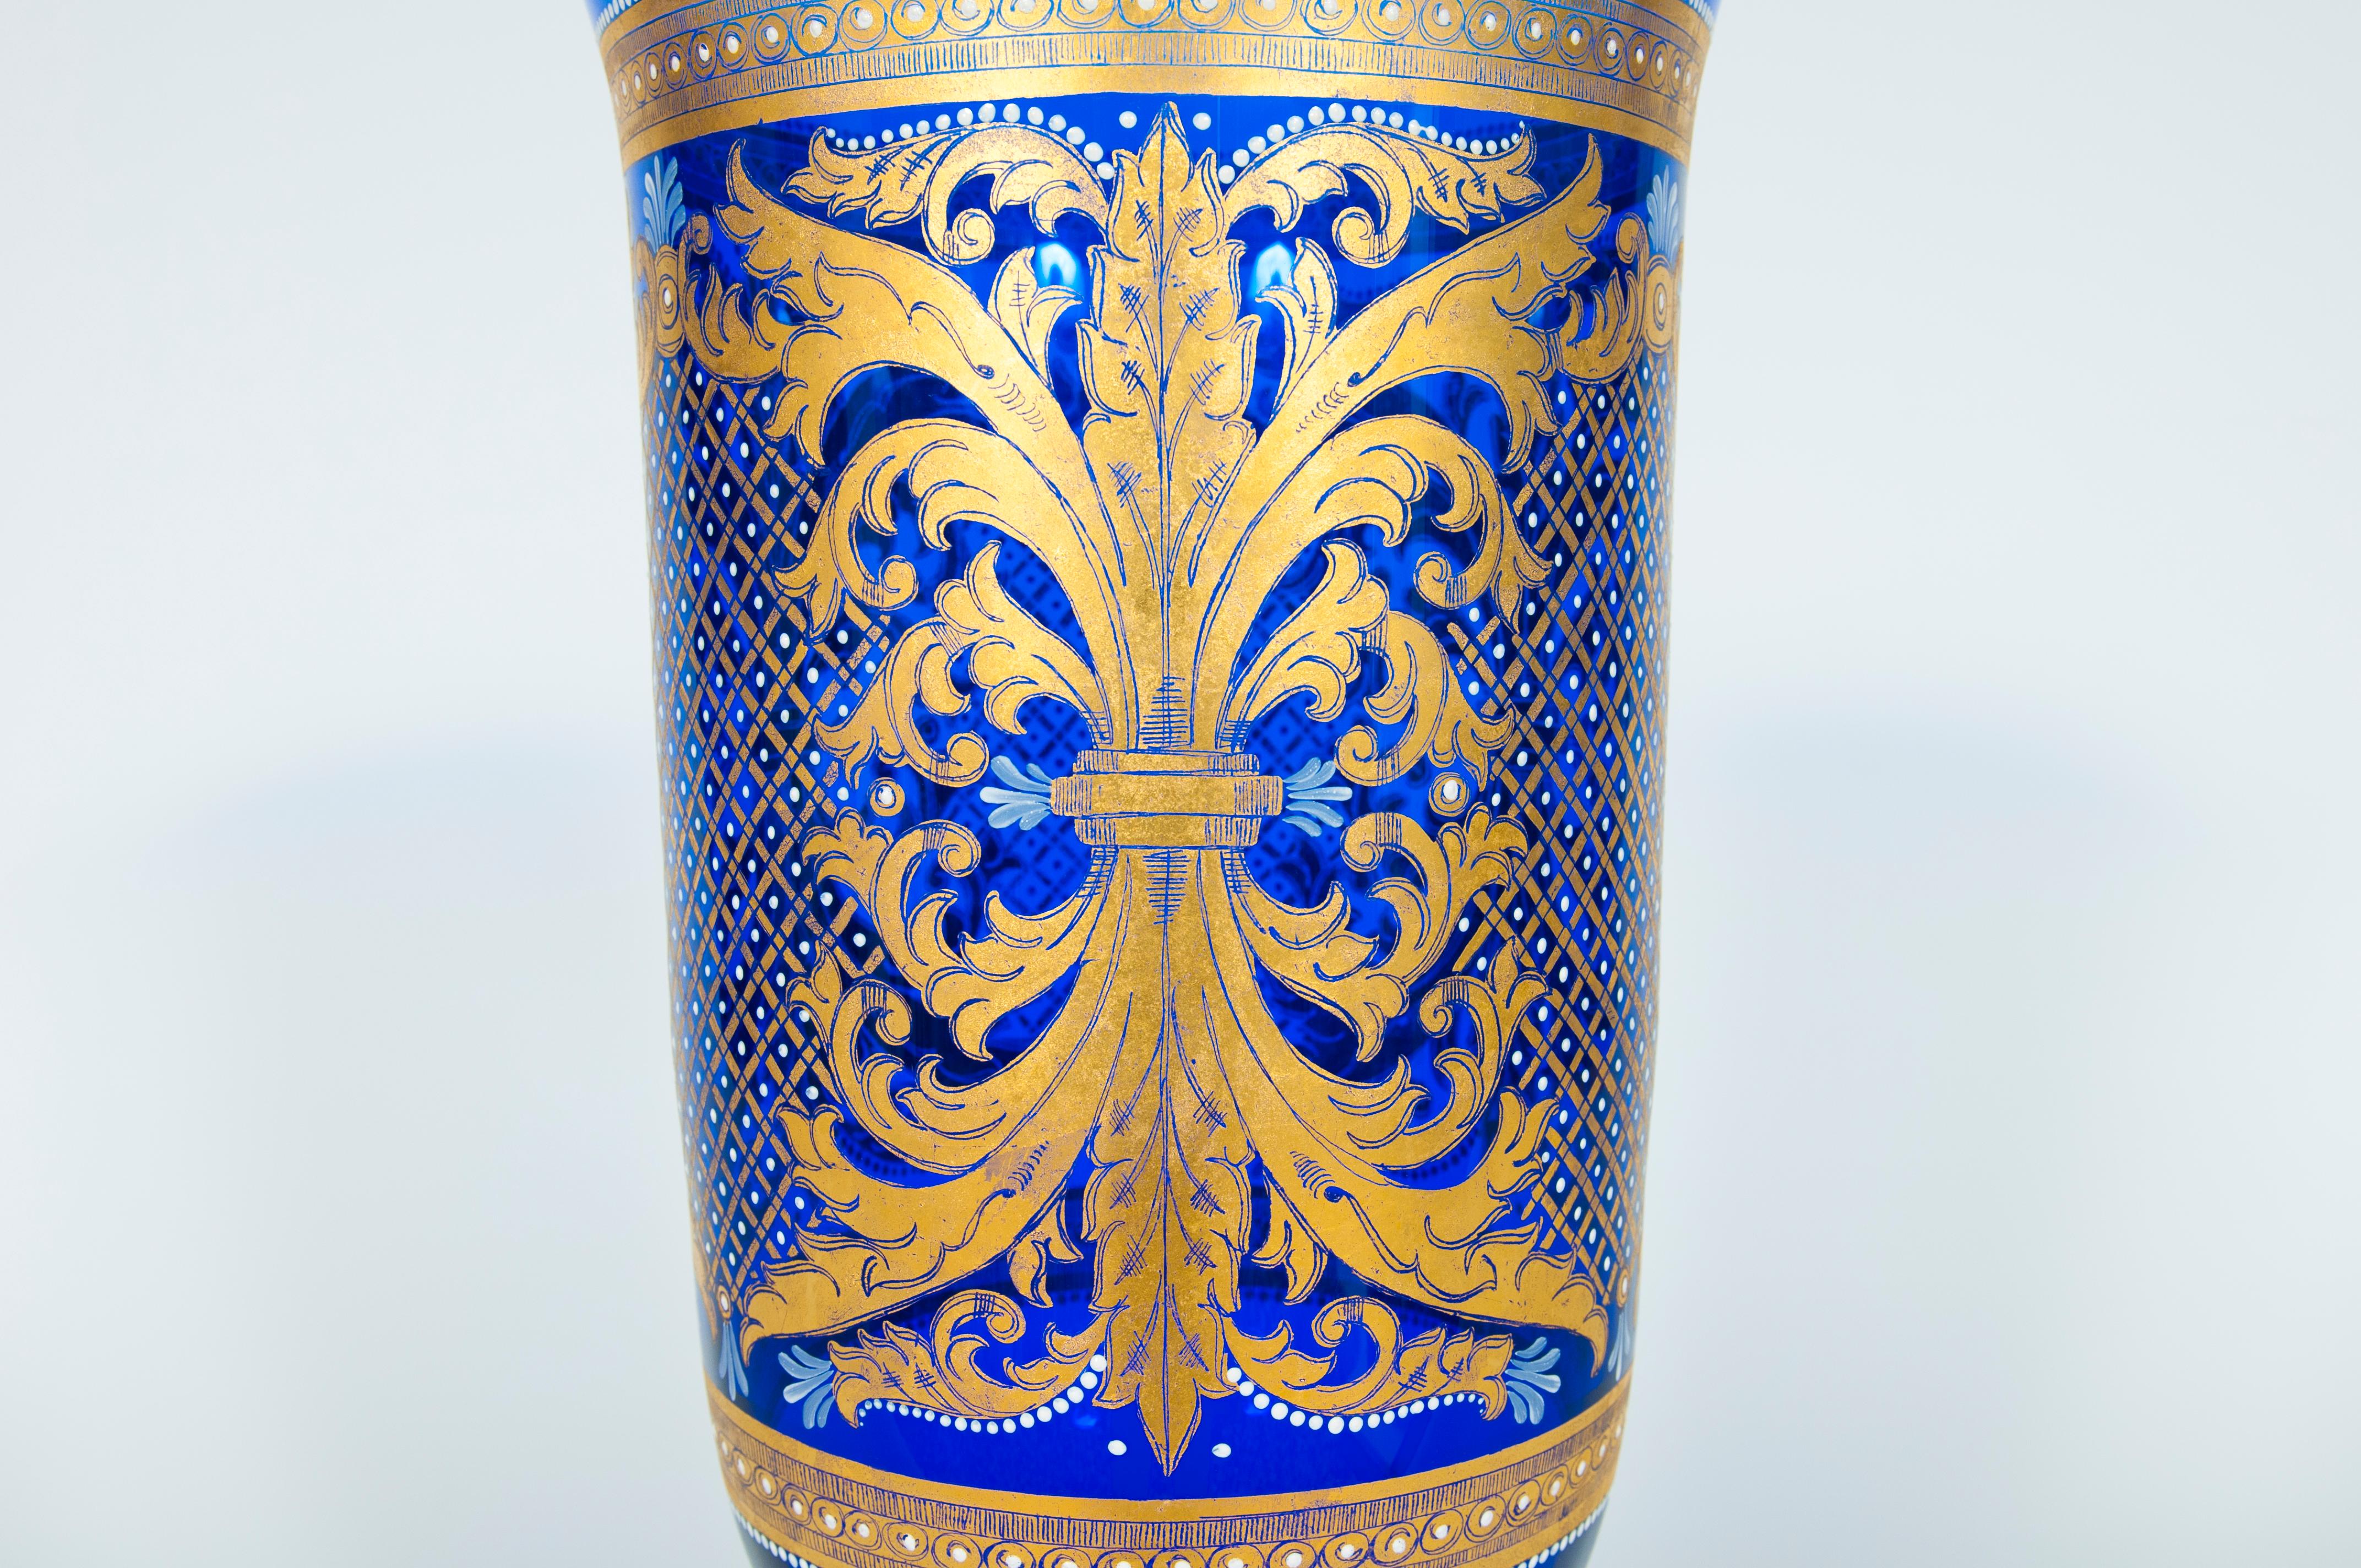 Extra-Large Murano Glass Cup with 24-Carat Gold Decorations, Italy, 1960s For Sale 1